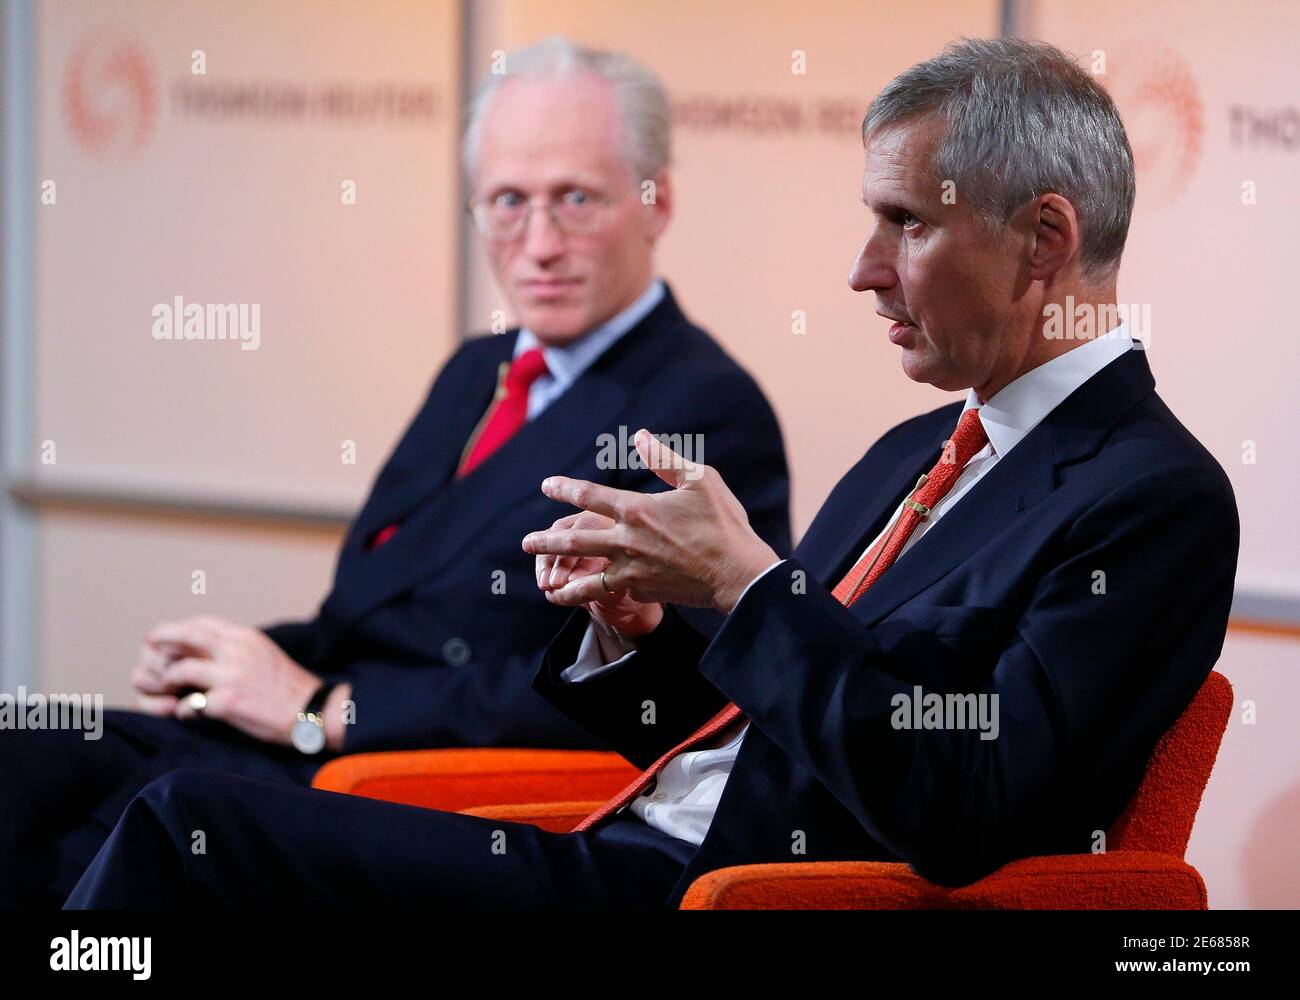 Martin Wheatley (R), the CEO designate of the new Financial Conduct Authority (FCA) speaks at a Thomson Reuters Newsmaker event, in the Canary Wharf business district of east London October 16, 2012.      REUTERS/Andrew Winning (BRITAIN - Tags: BUSINESS POLITICS) Stock Photo